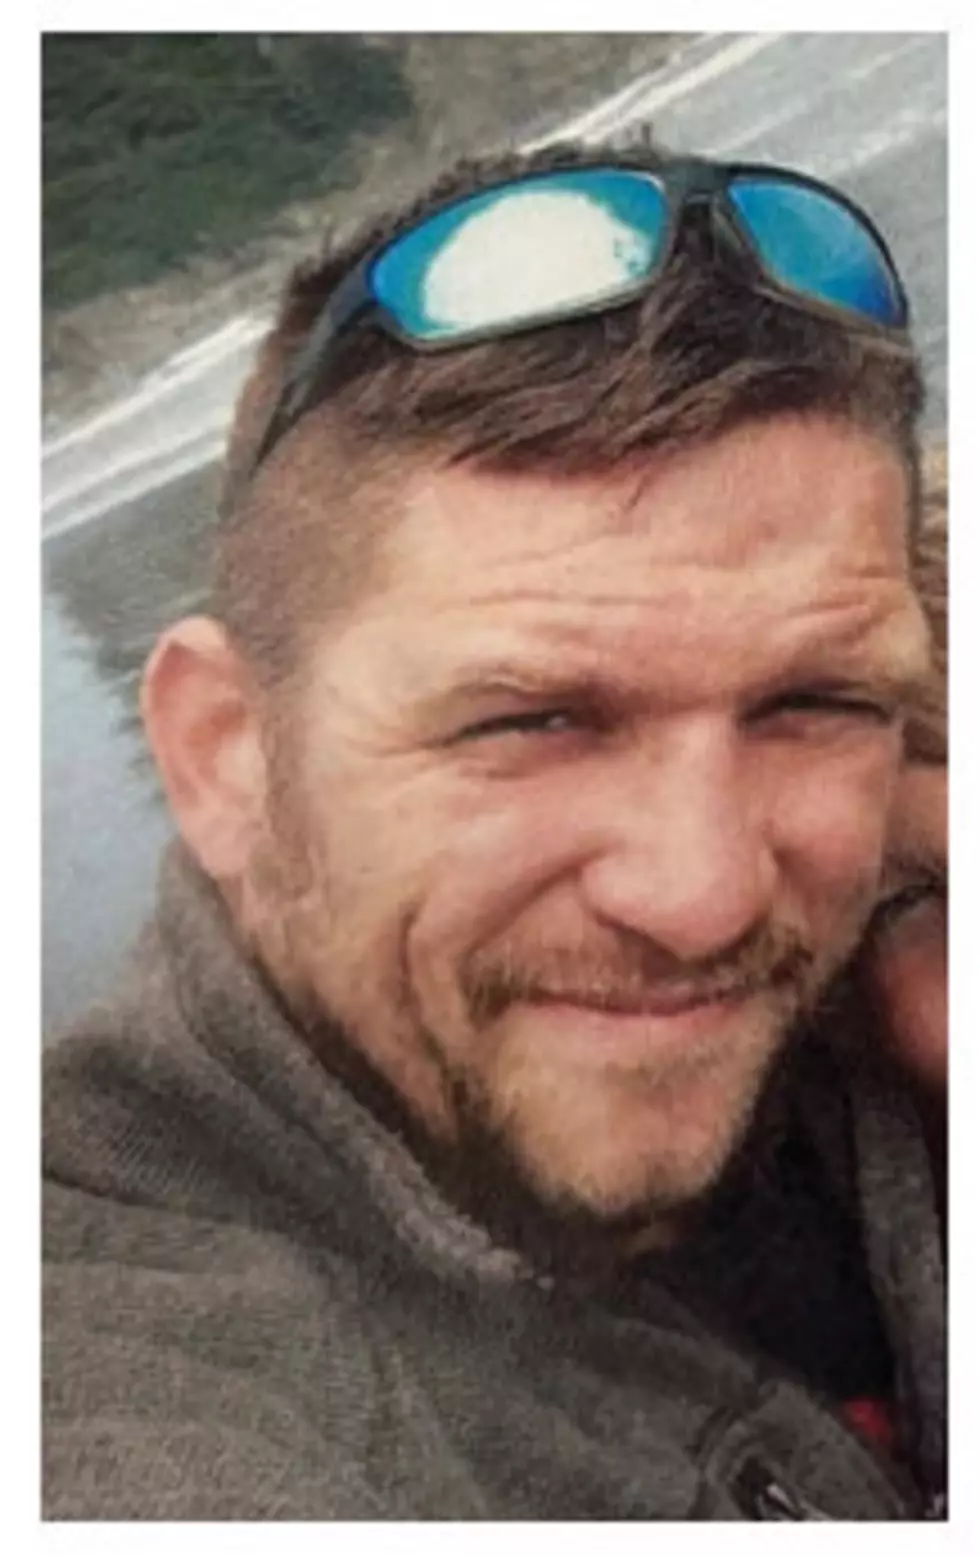 Statewide Alert Issued for Missing Minnesota Man